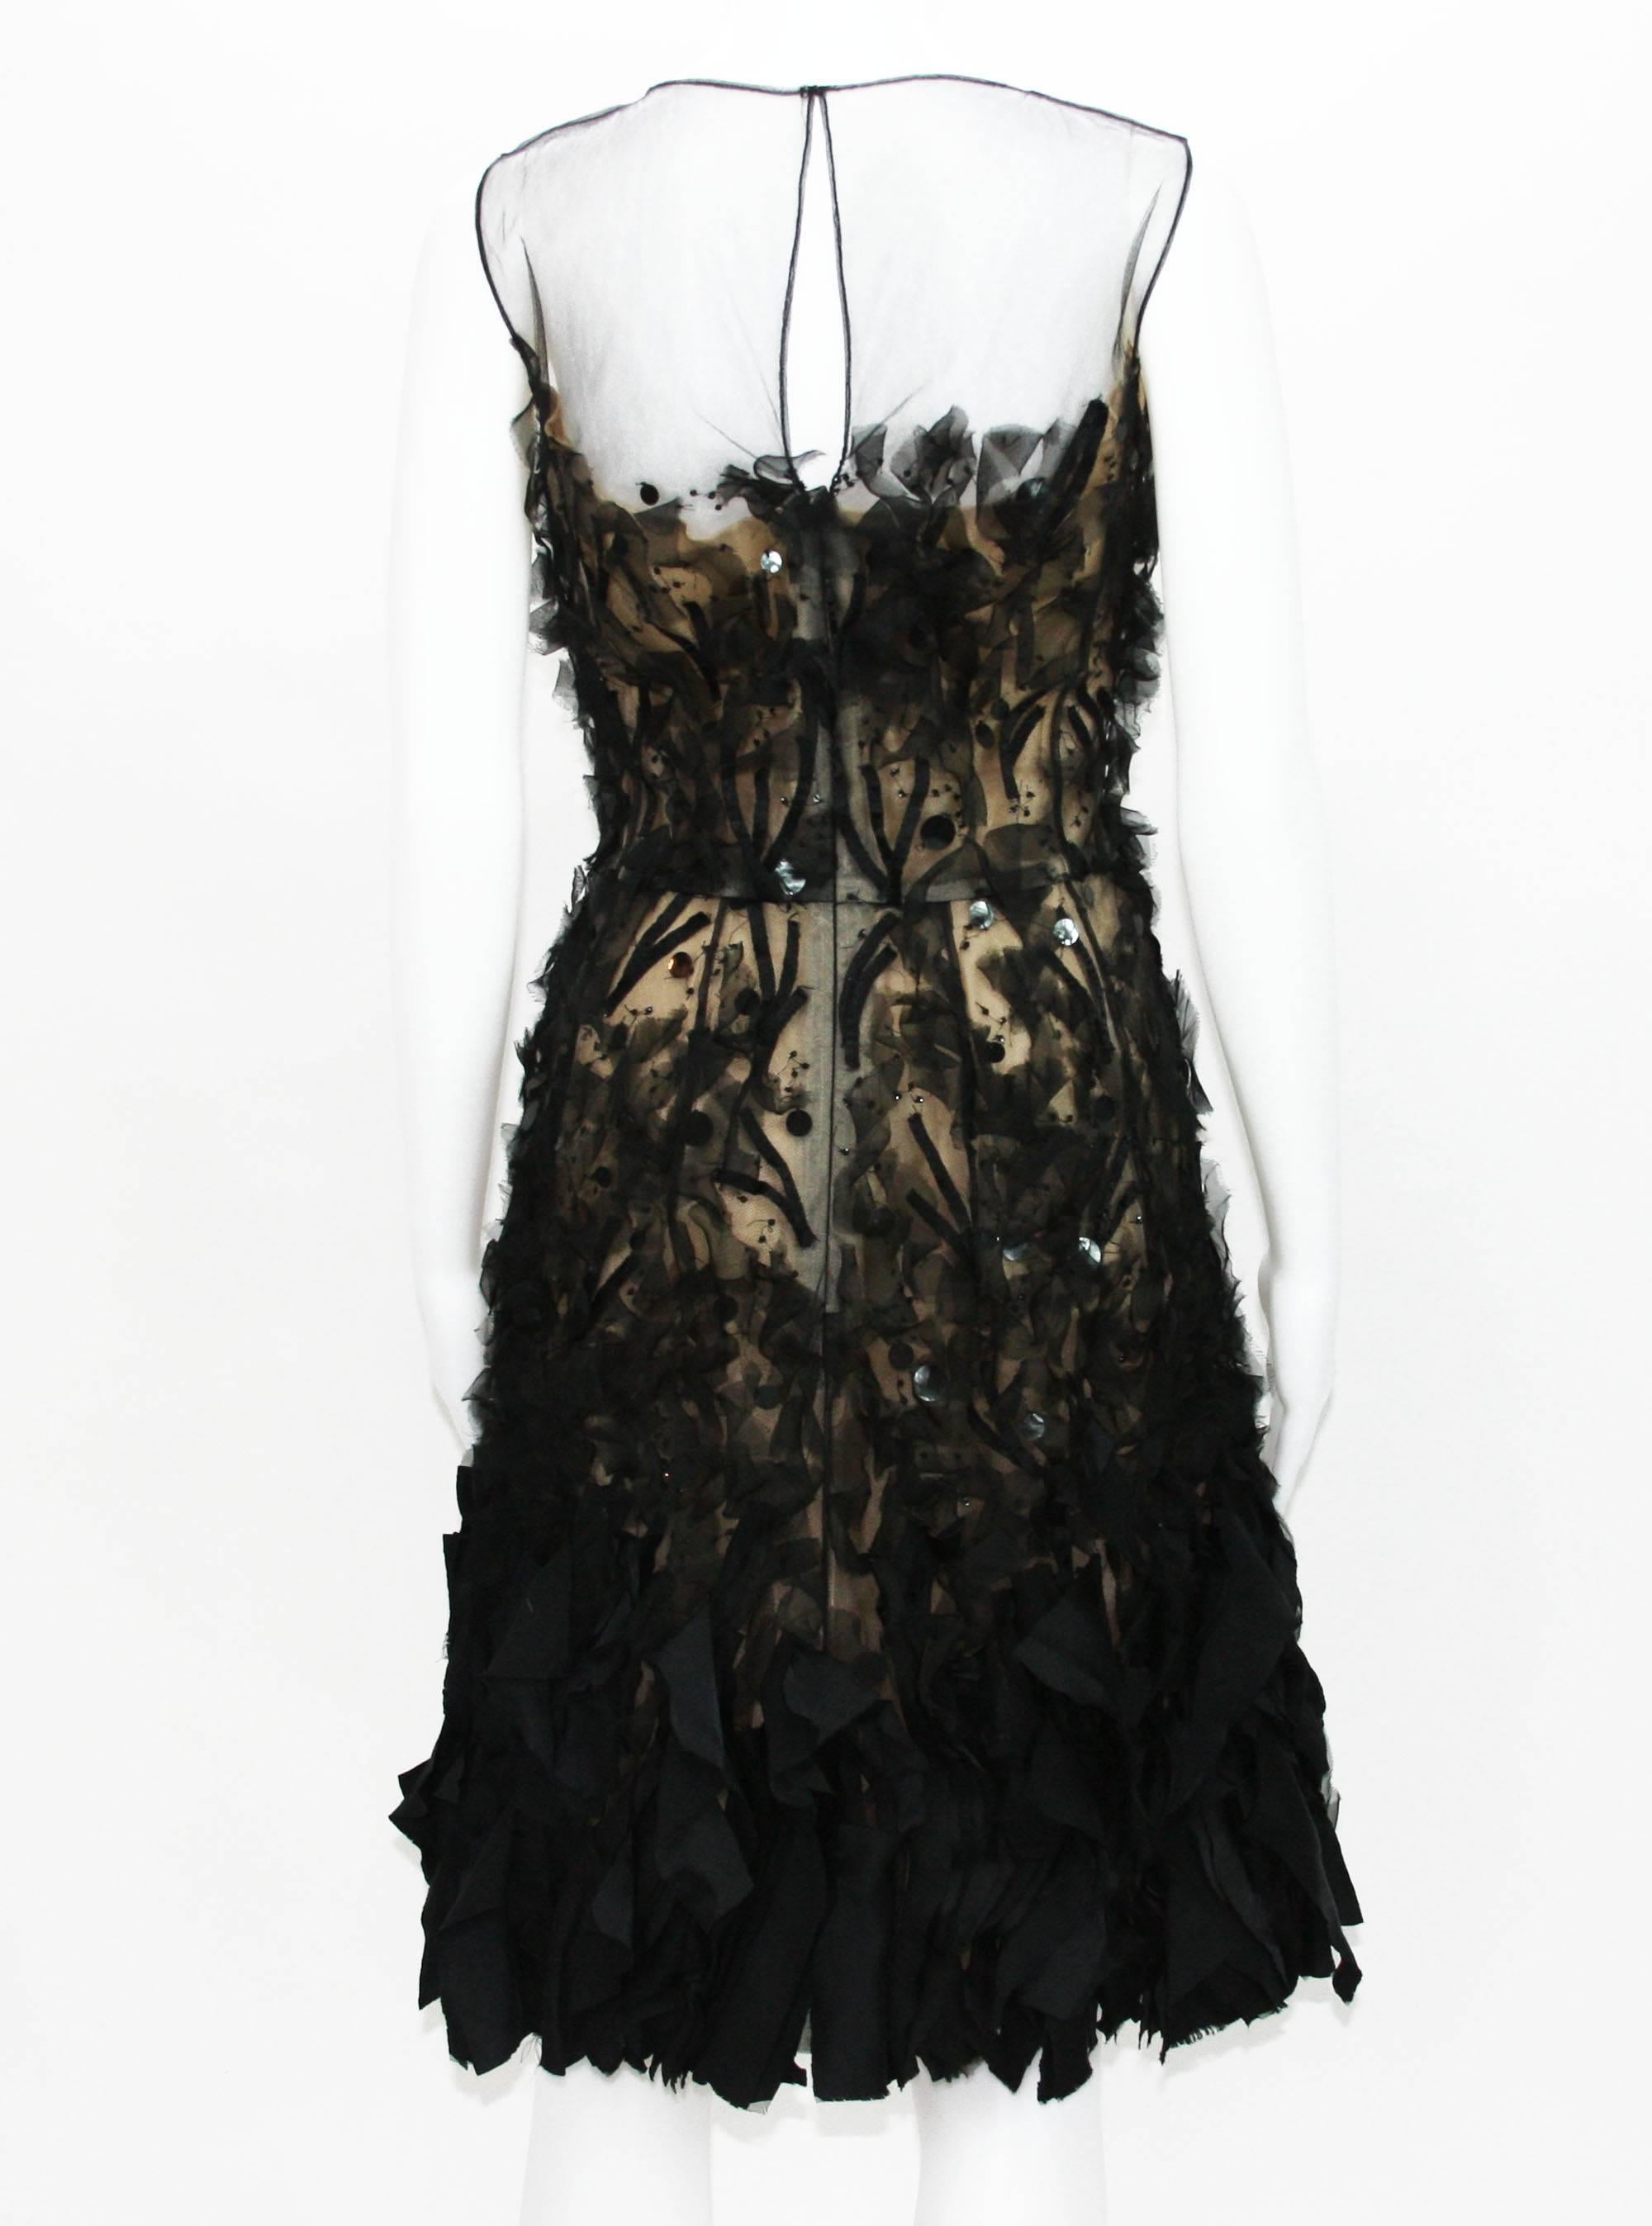 Oscar de la Renta -- black silk organza and tulle dress with 3D embellishments cocktail dress.
The dress has incredible detailing and super flattering feminine silhouette. 
The dress is covered in hand-made, raw-edged 3D appliques.
Each detail is